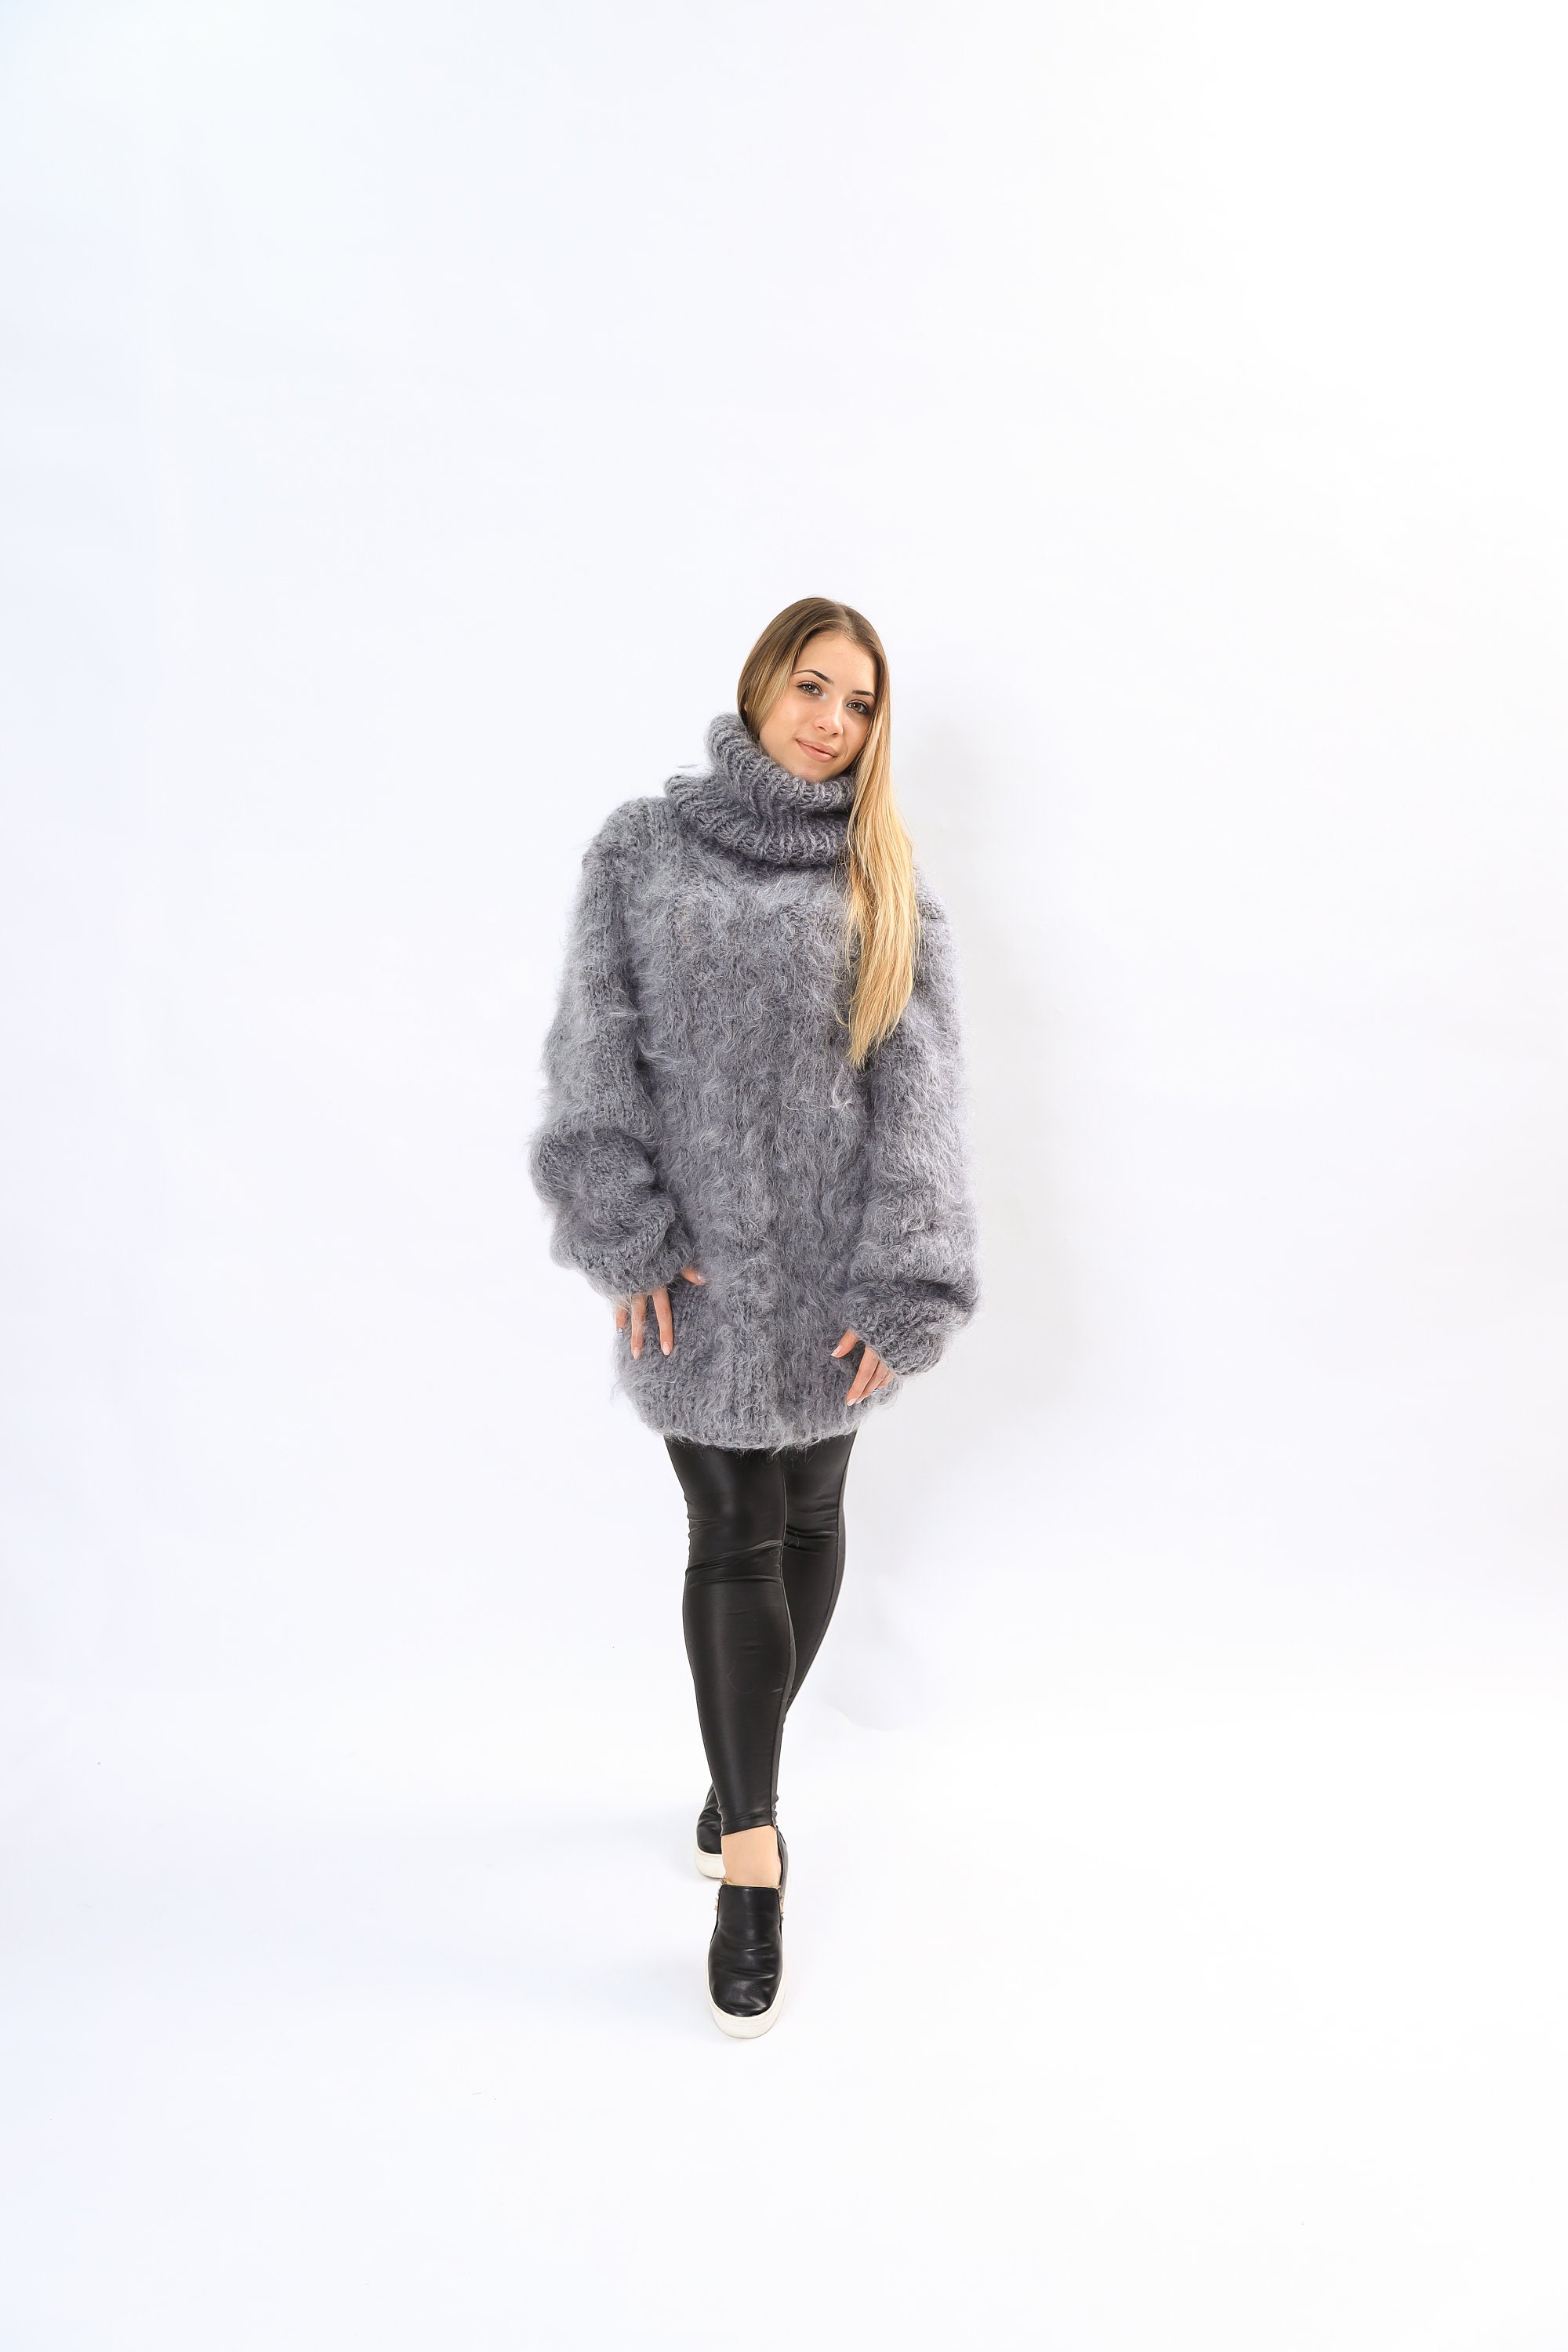 Gray Cable Mohair Fluffy Sweater , Turtleneck Sweater, Knit Jumper Fuzzy Mohair Sweater